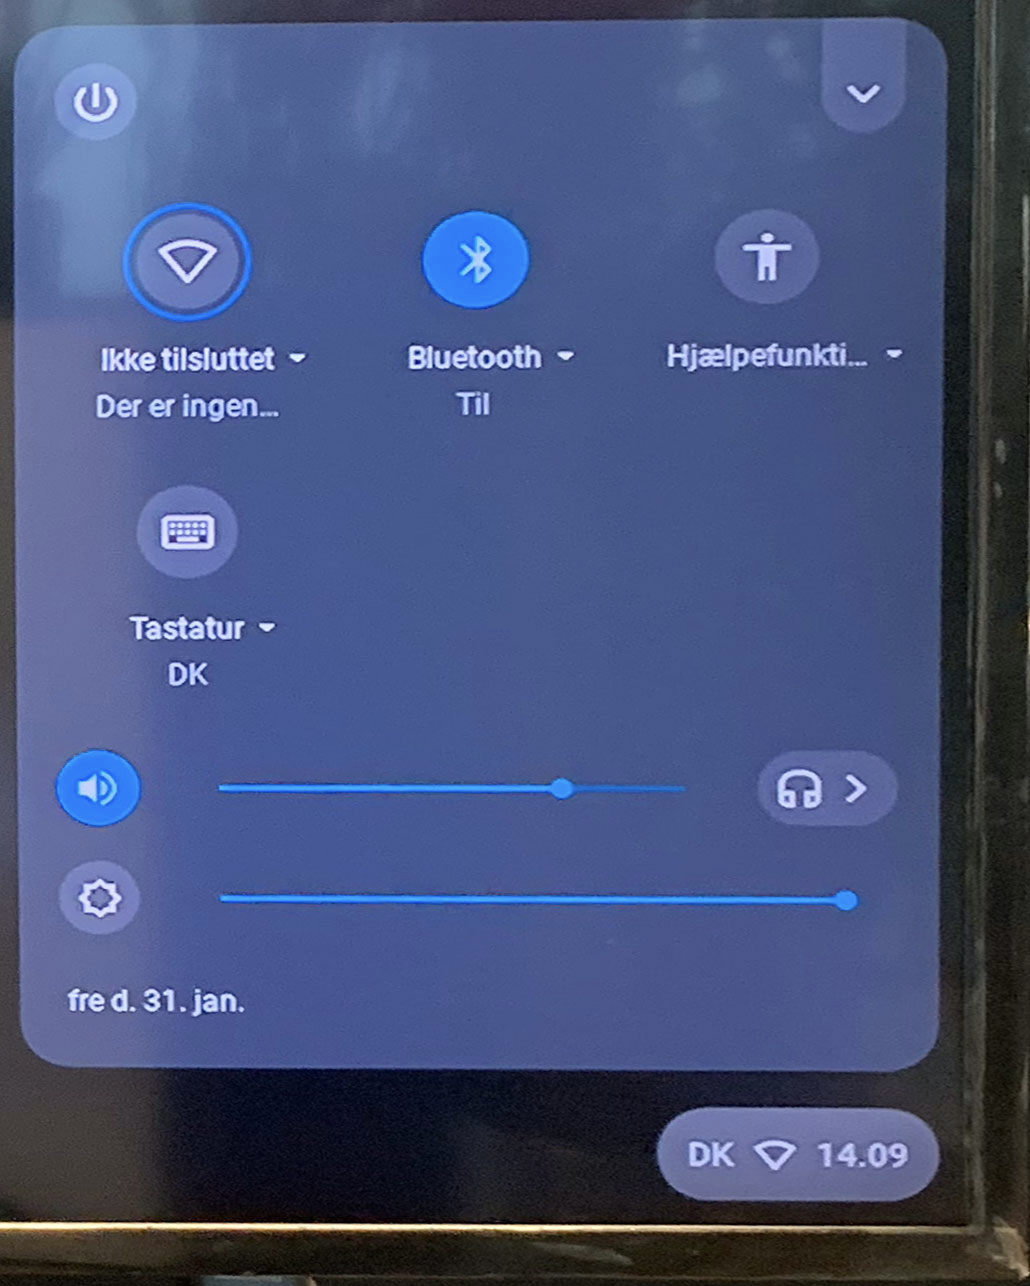 Device settings screen showing Bluetooth on, accessibility options, and volume control, with Danish keyboard layout selected.